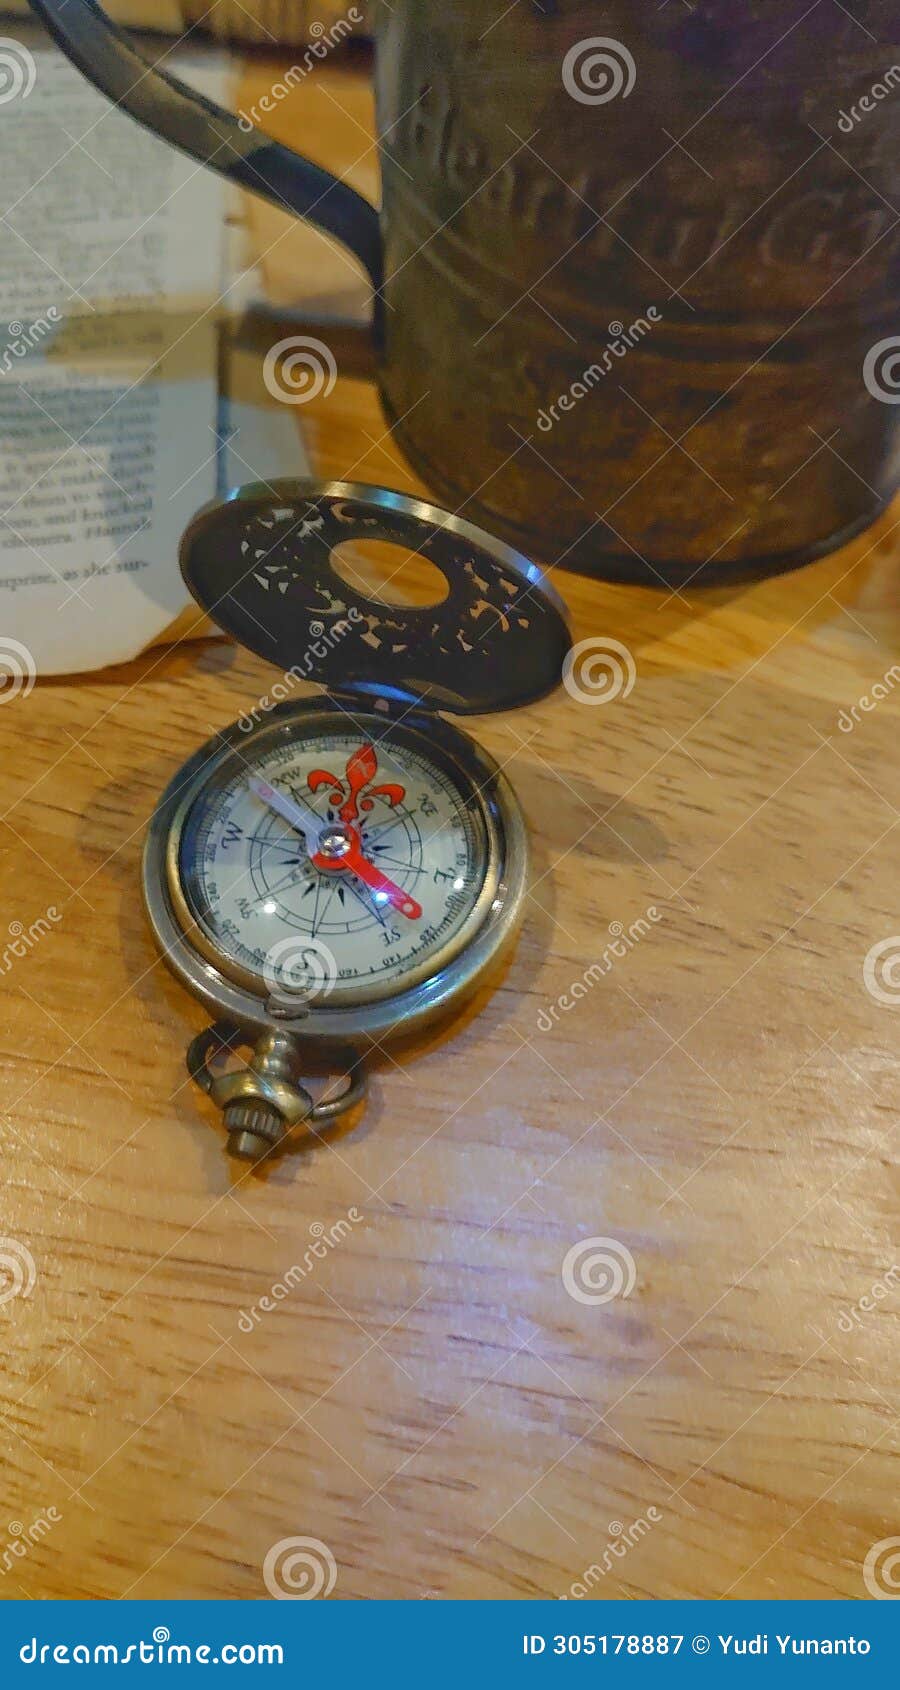 Vintage Compass Showing North for Sailing in the Sea Stock Image ...